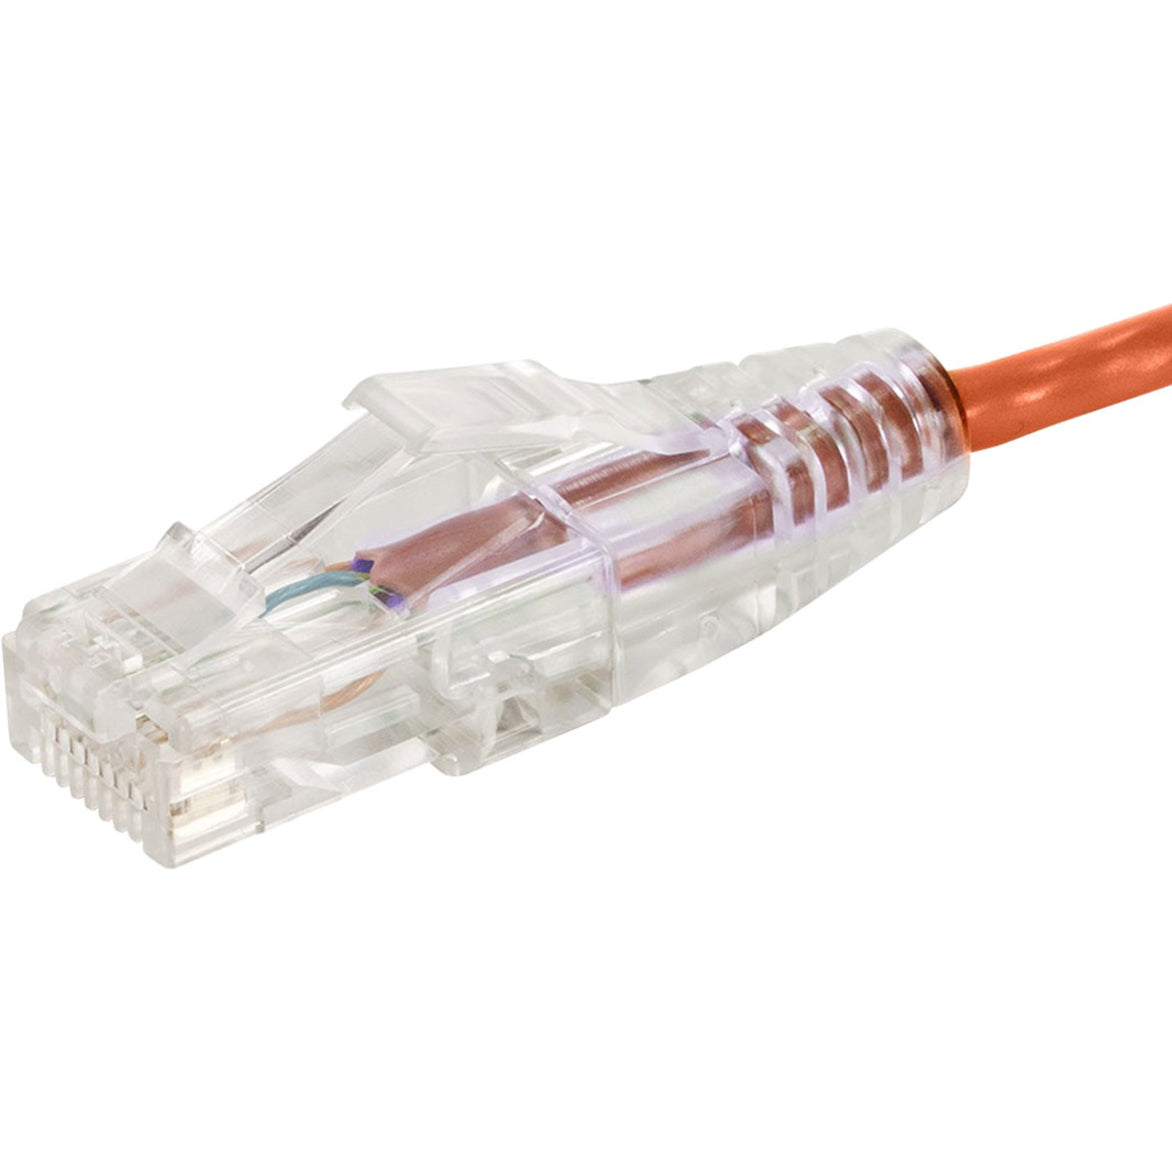 Monoprice 14819 SlimRun Cat6 10ft Orange Ethernet Network Cable, Flexible and Snagless